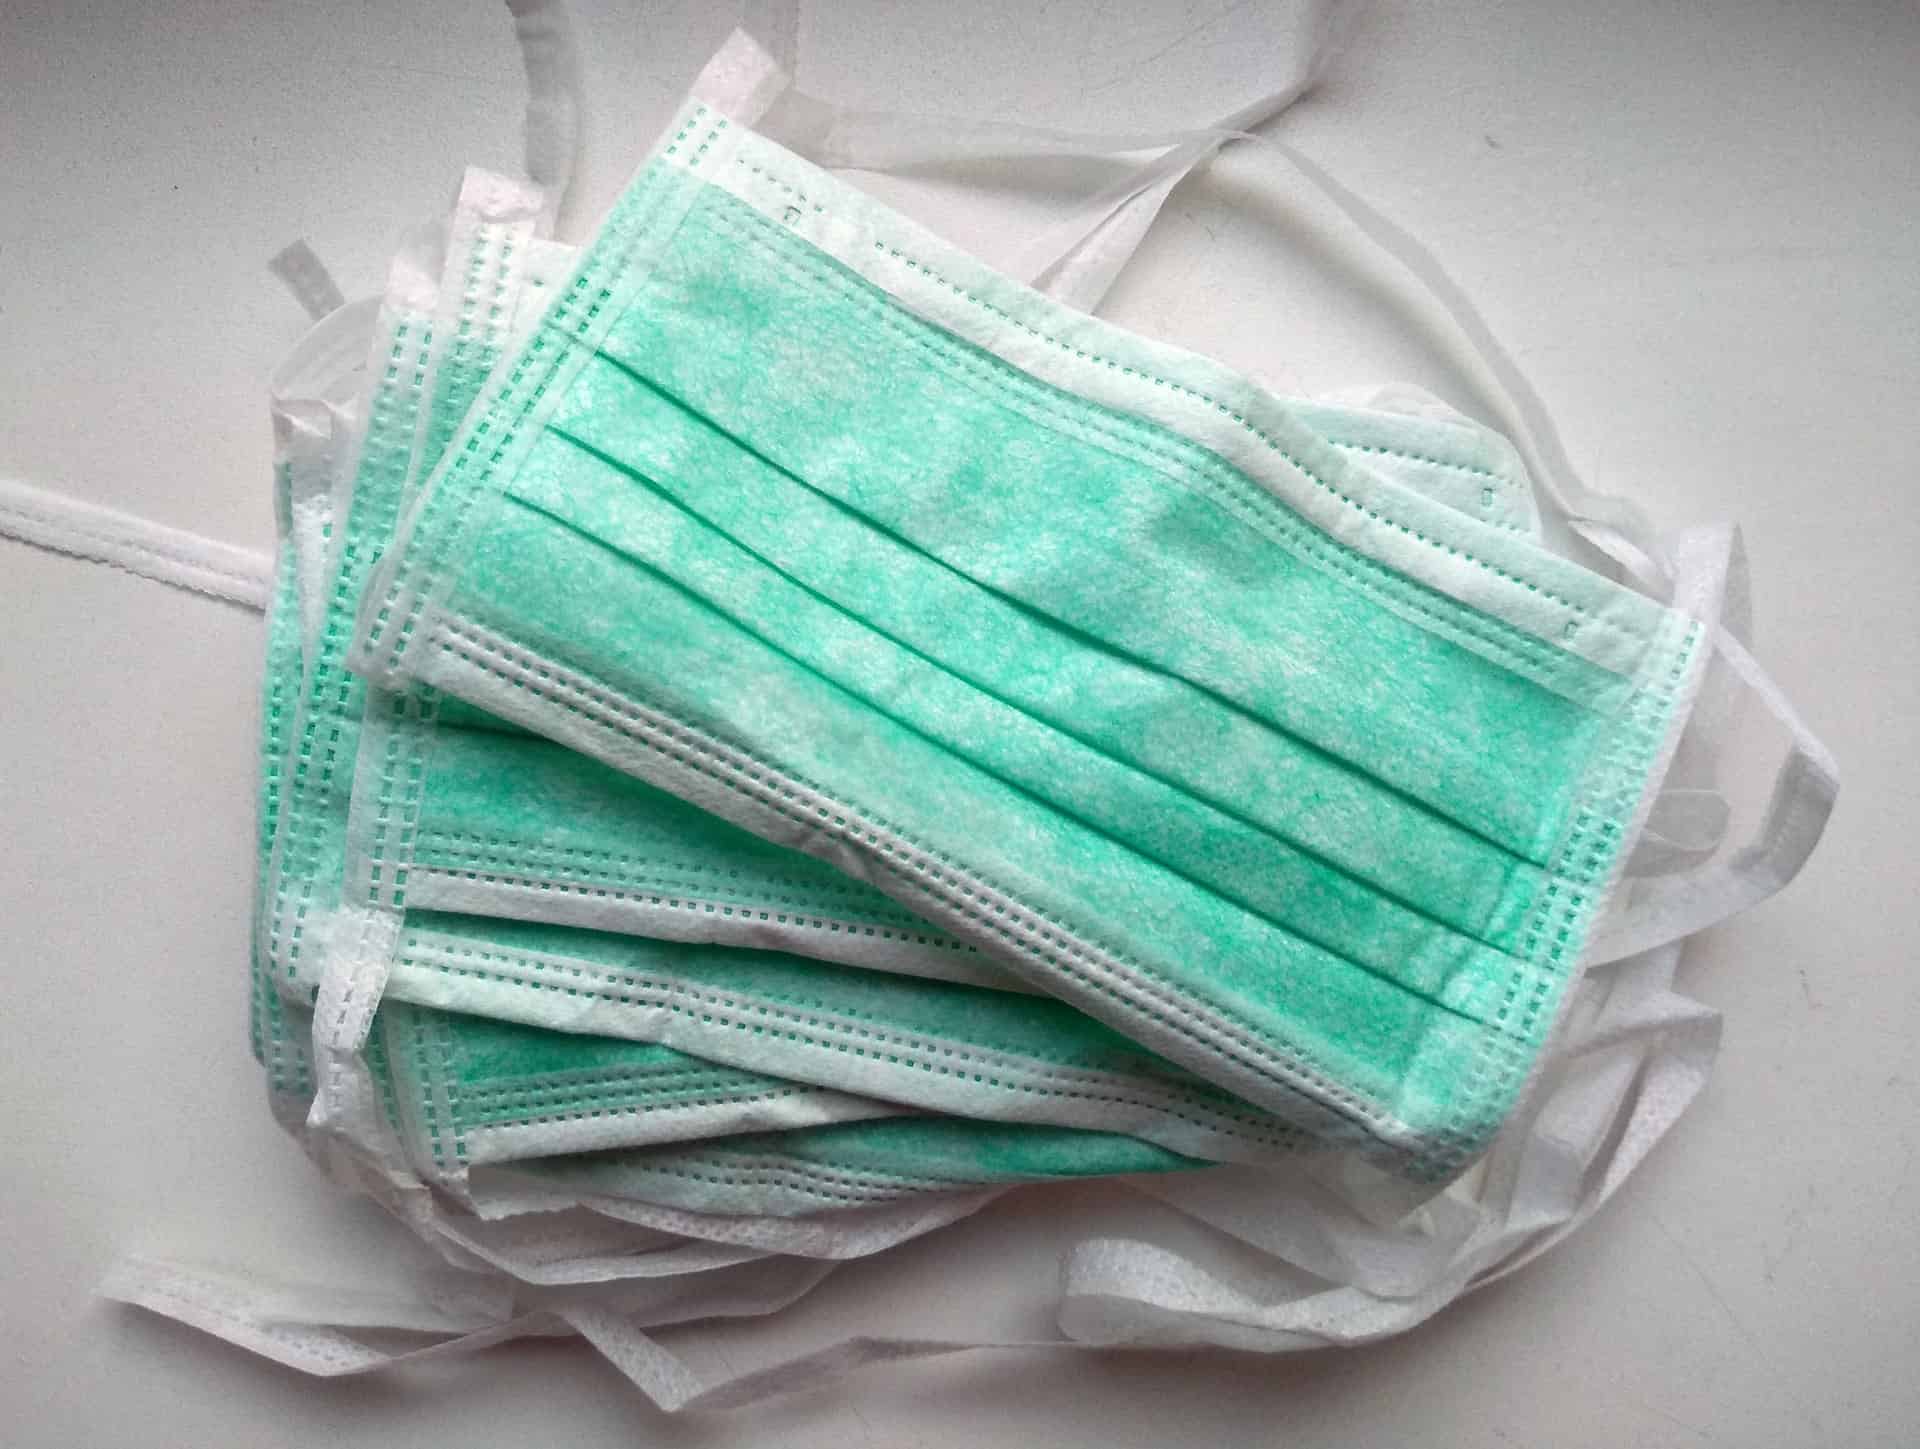 covid_face_masks_used_to_prevent_the_spread_of_coronavirus_and_other_diseases_1